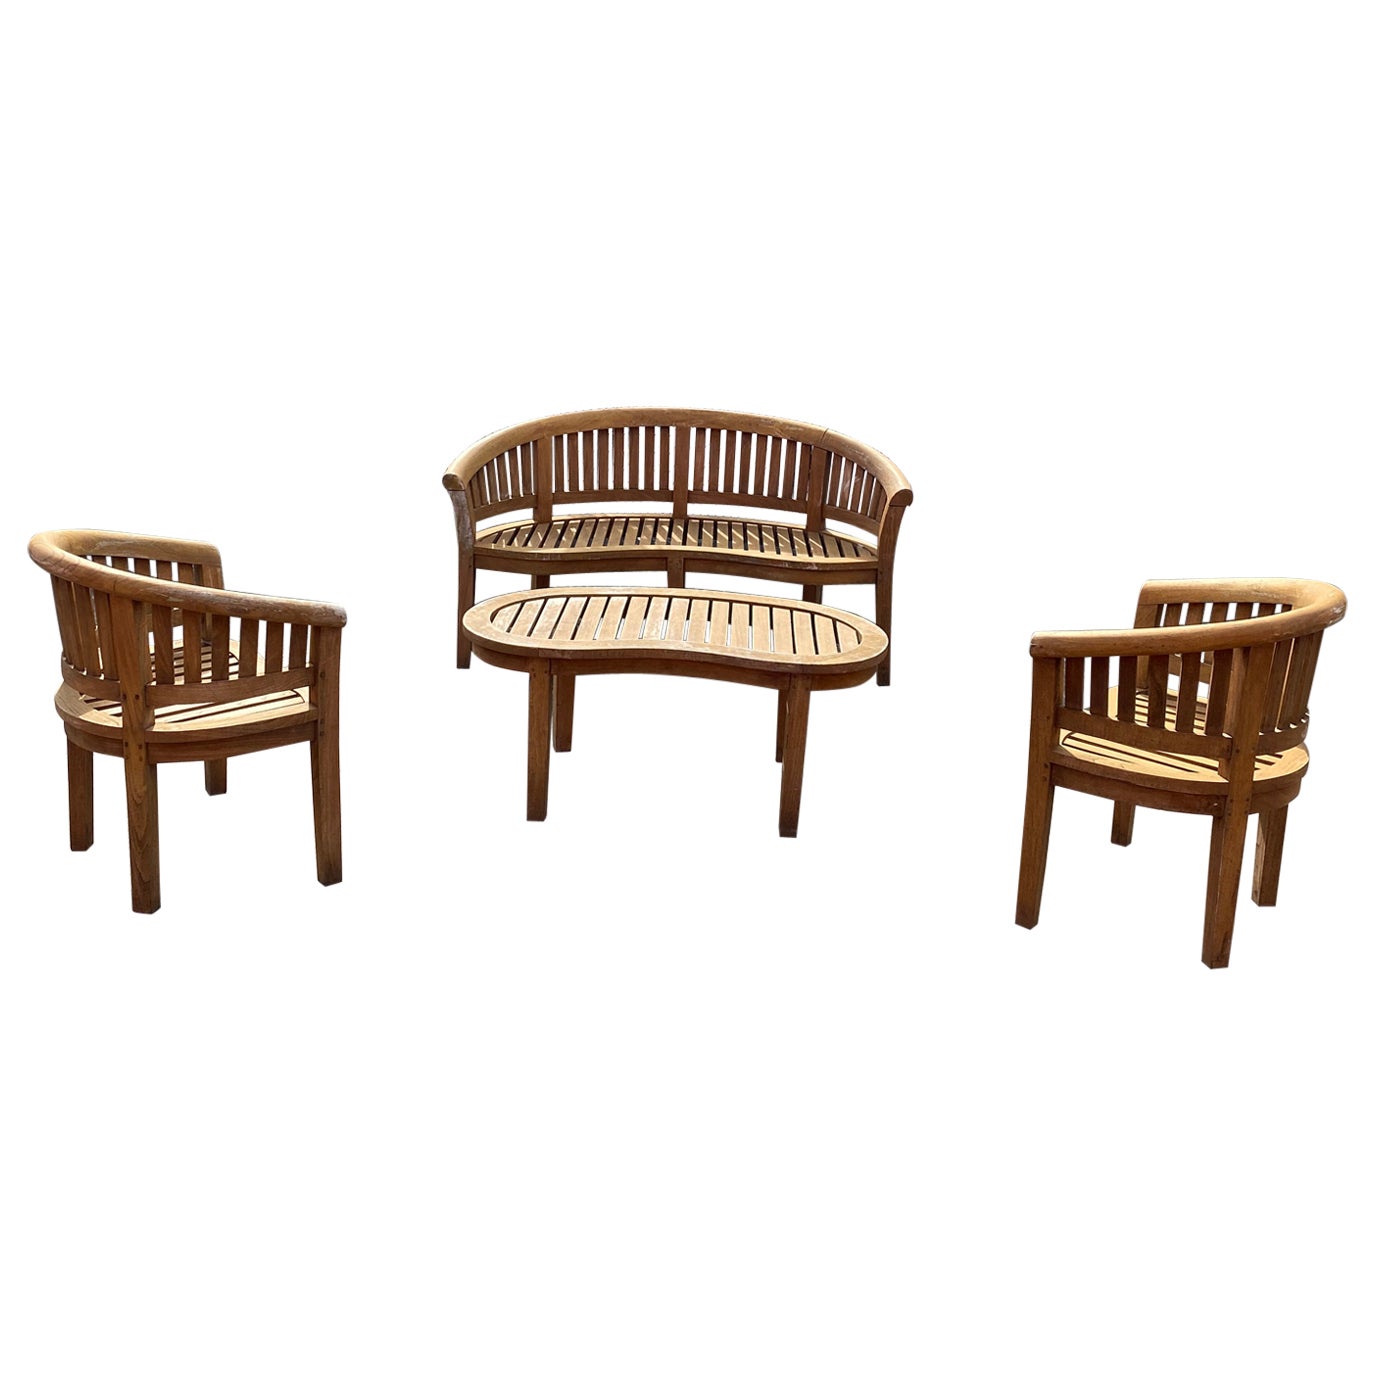 1970s Teak Curved Barrel Kidney Slatted Settee Table Chairs, Set of 4 For Sale